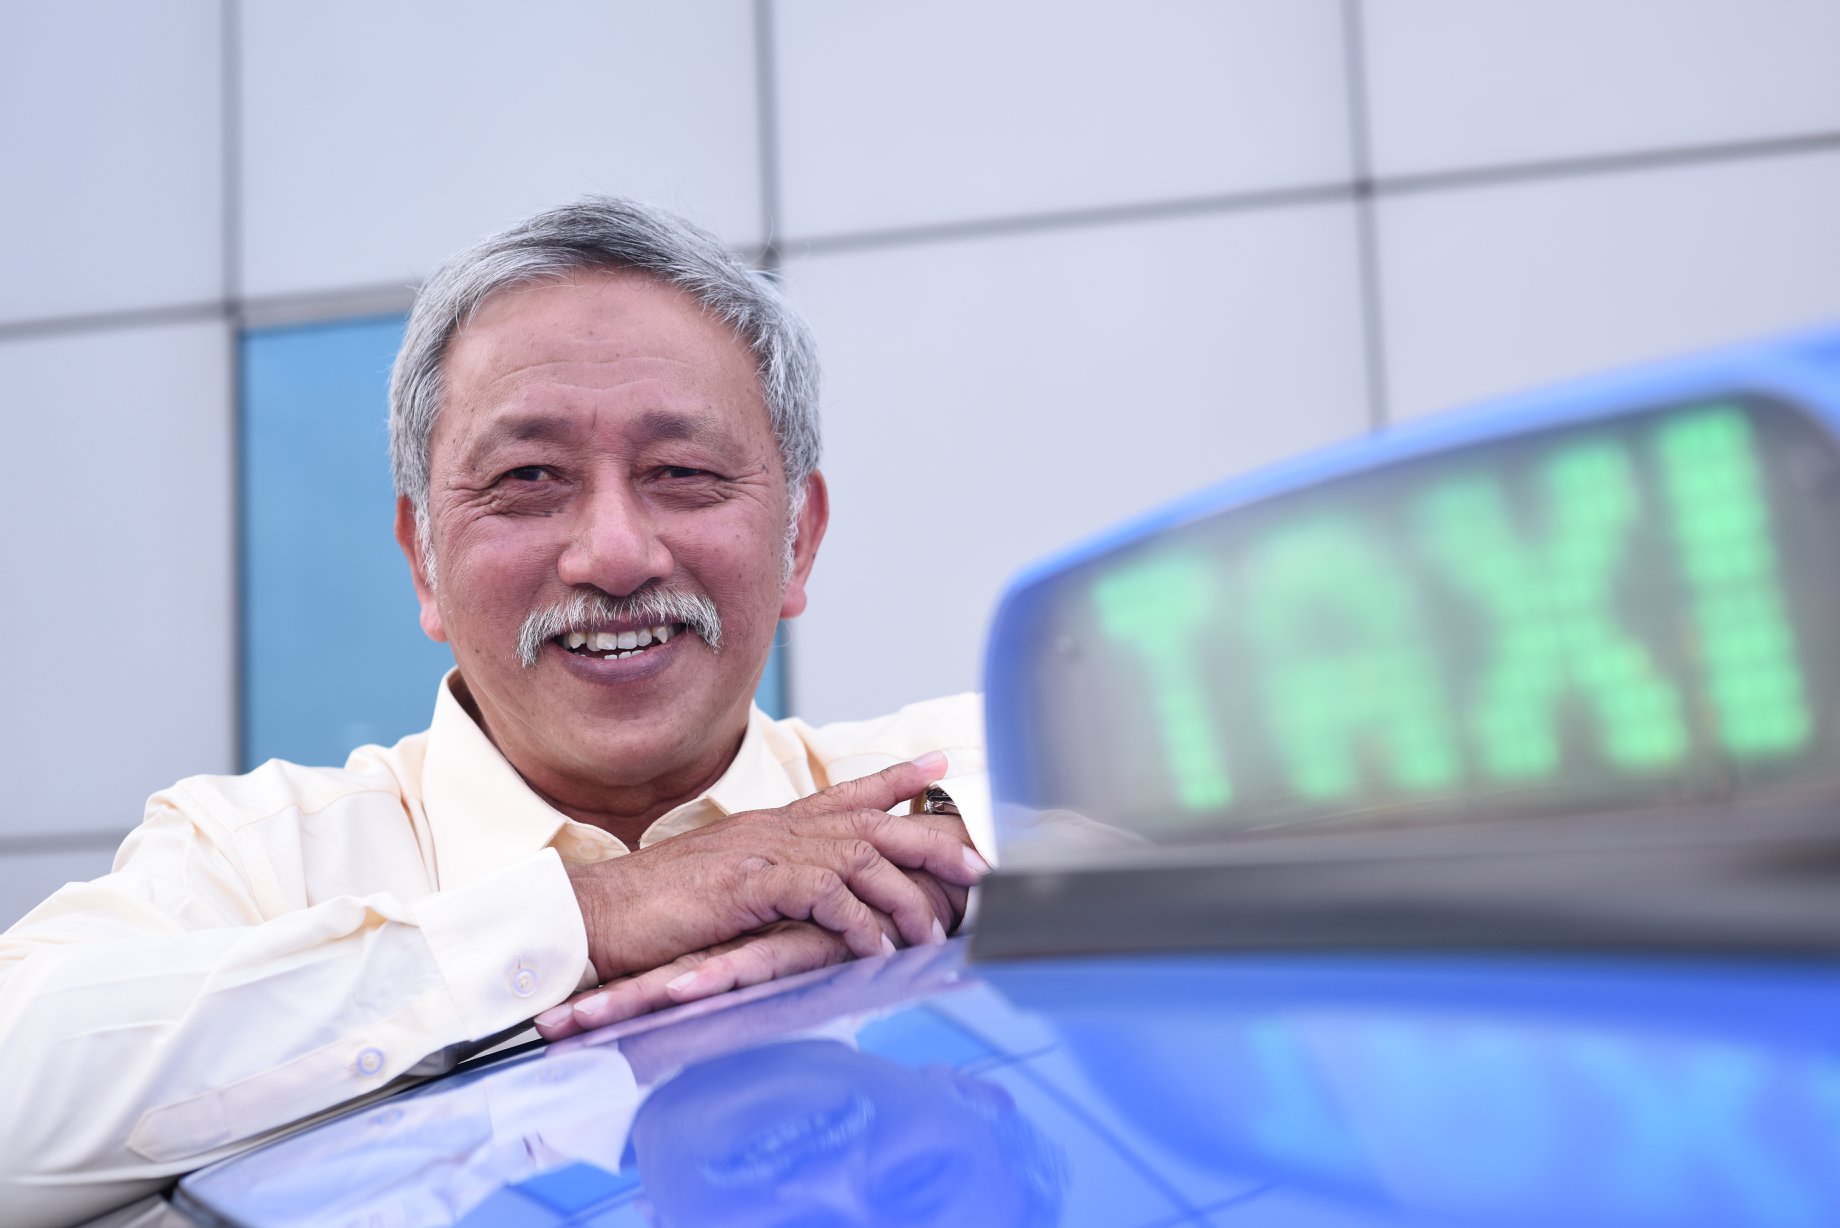 When do I need to renew my Taxi Driver’s Vocational Licence (TDVL)?